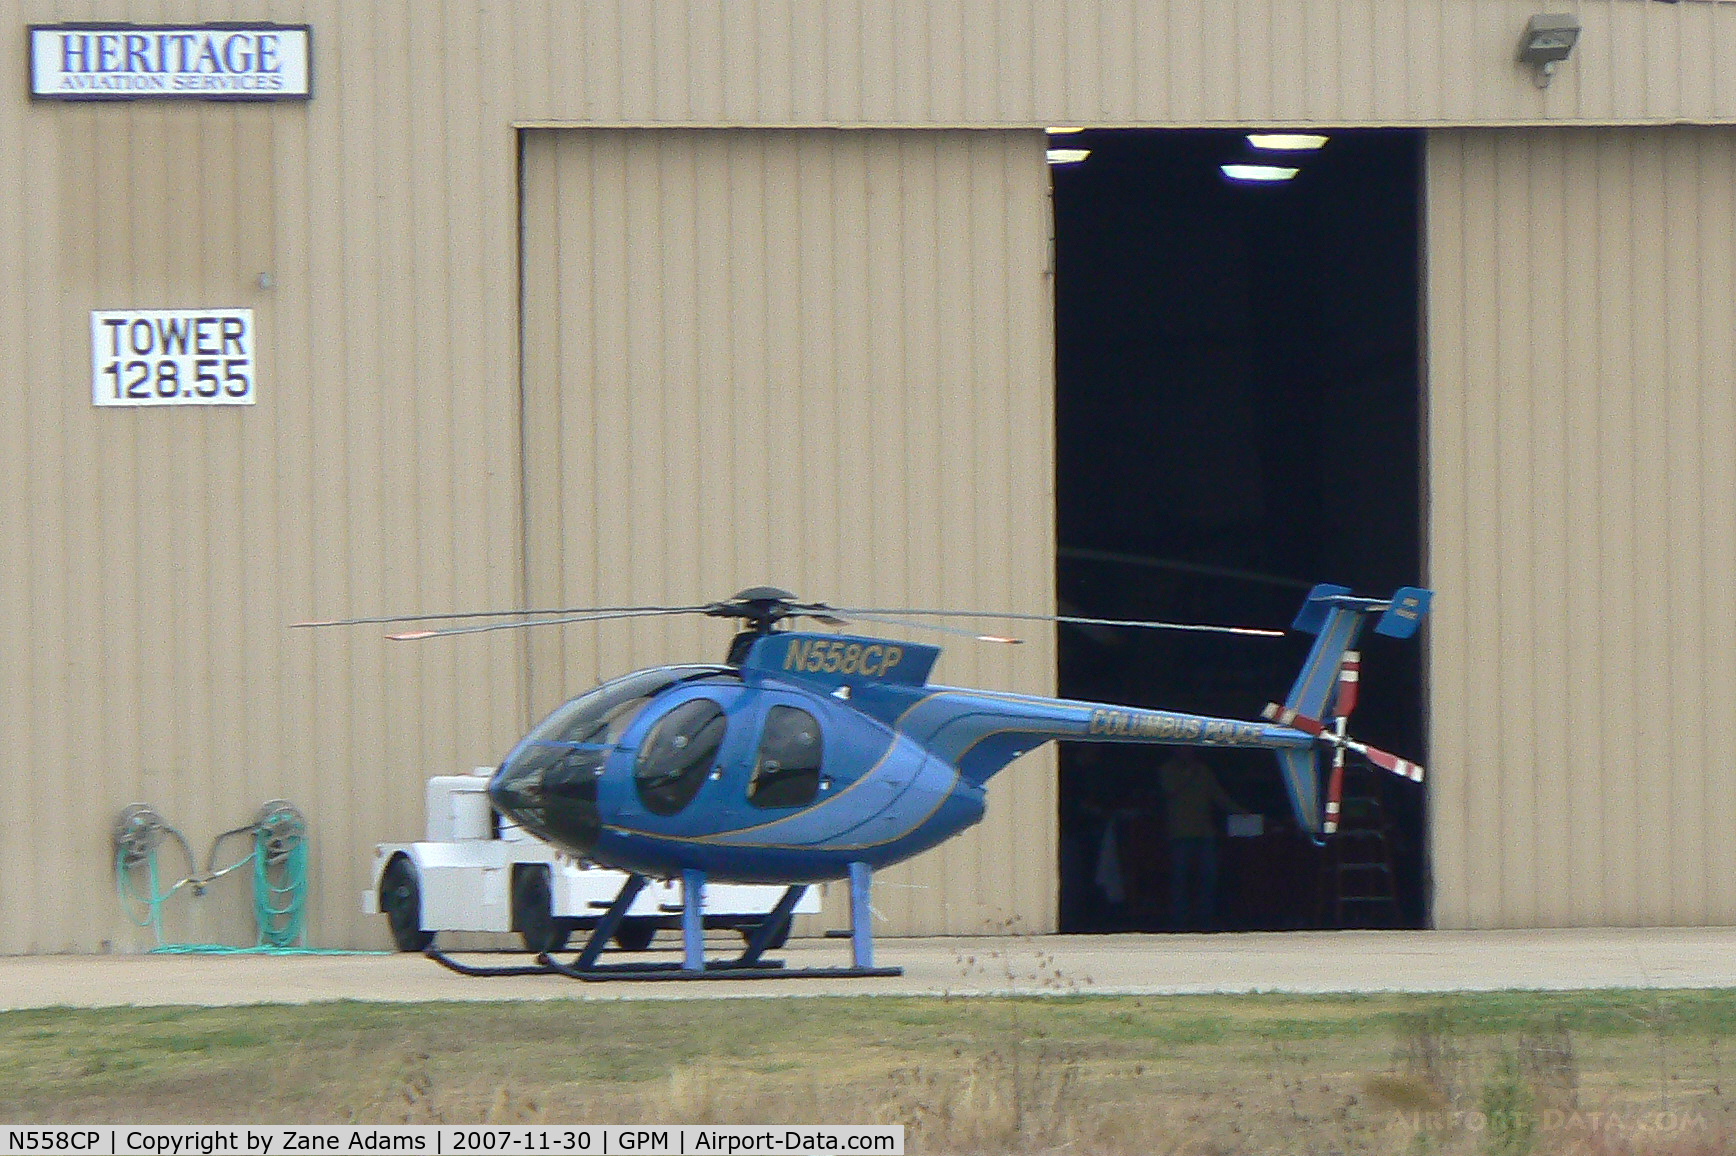 N558CP, 2007 MD Helicopters 369E C/N 0573E, New MD Helo at Grand Prairie .... New Columbus Police Helo to replace Bell 206?